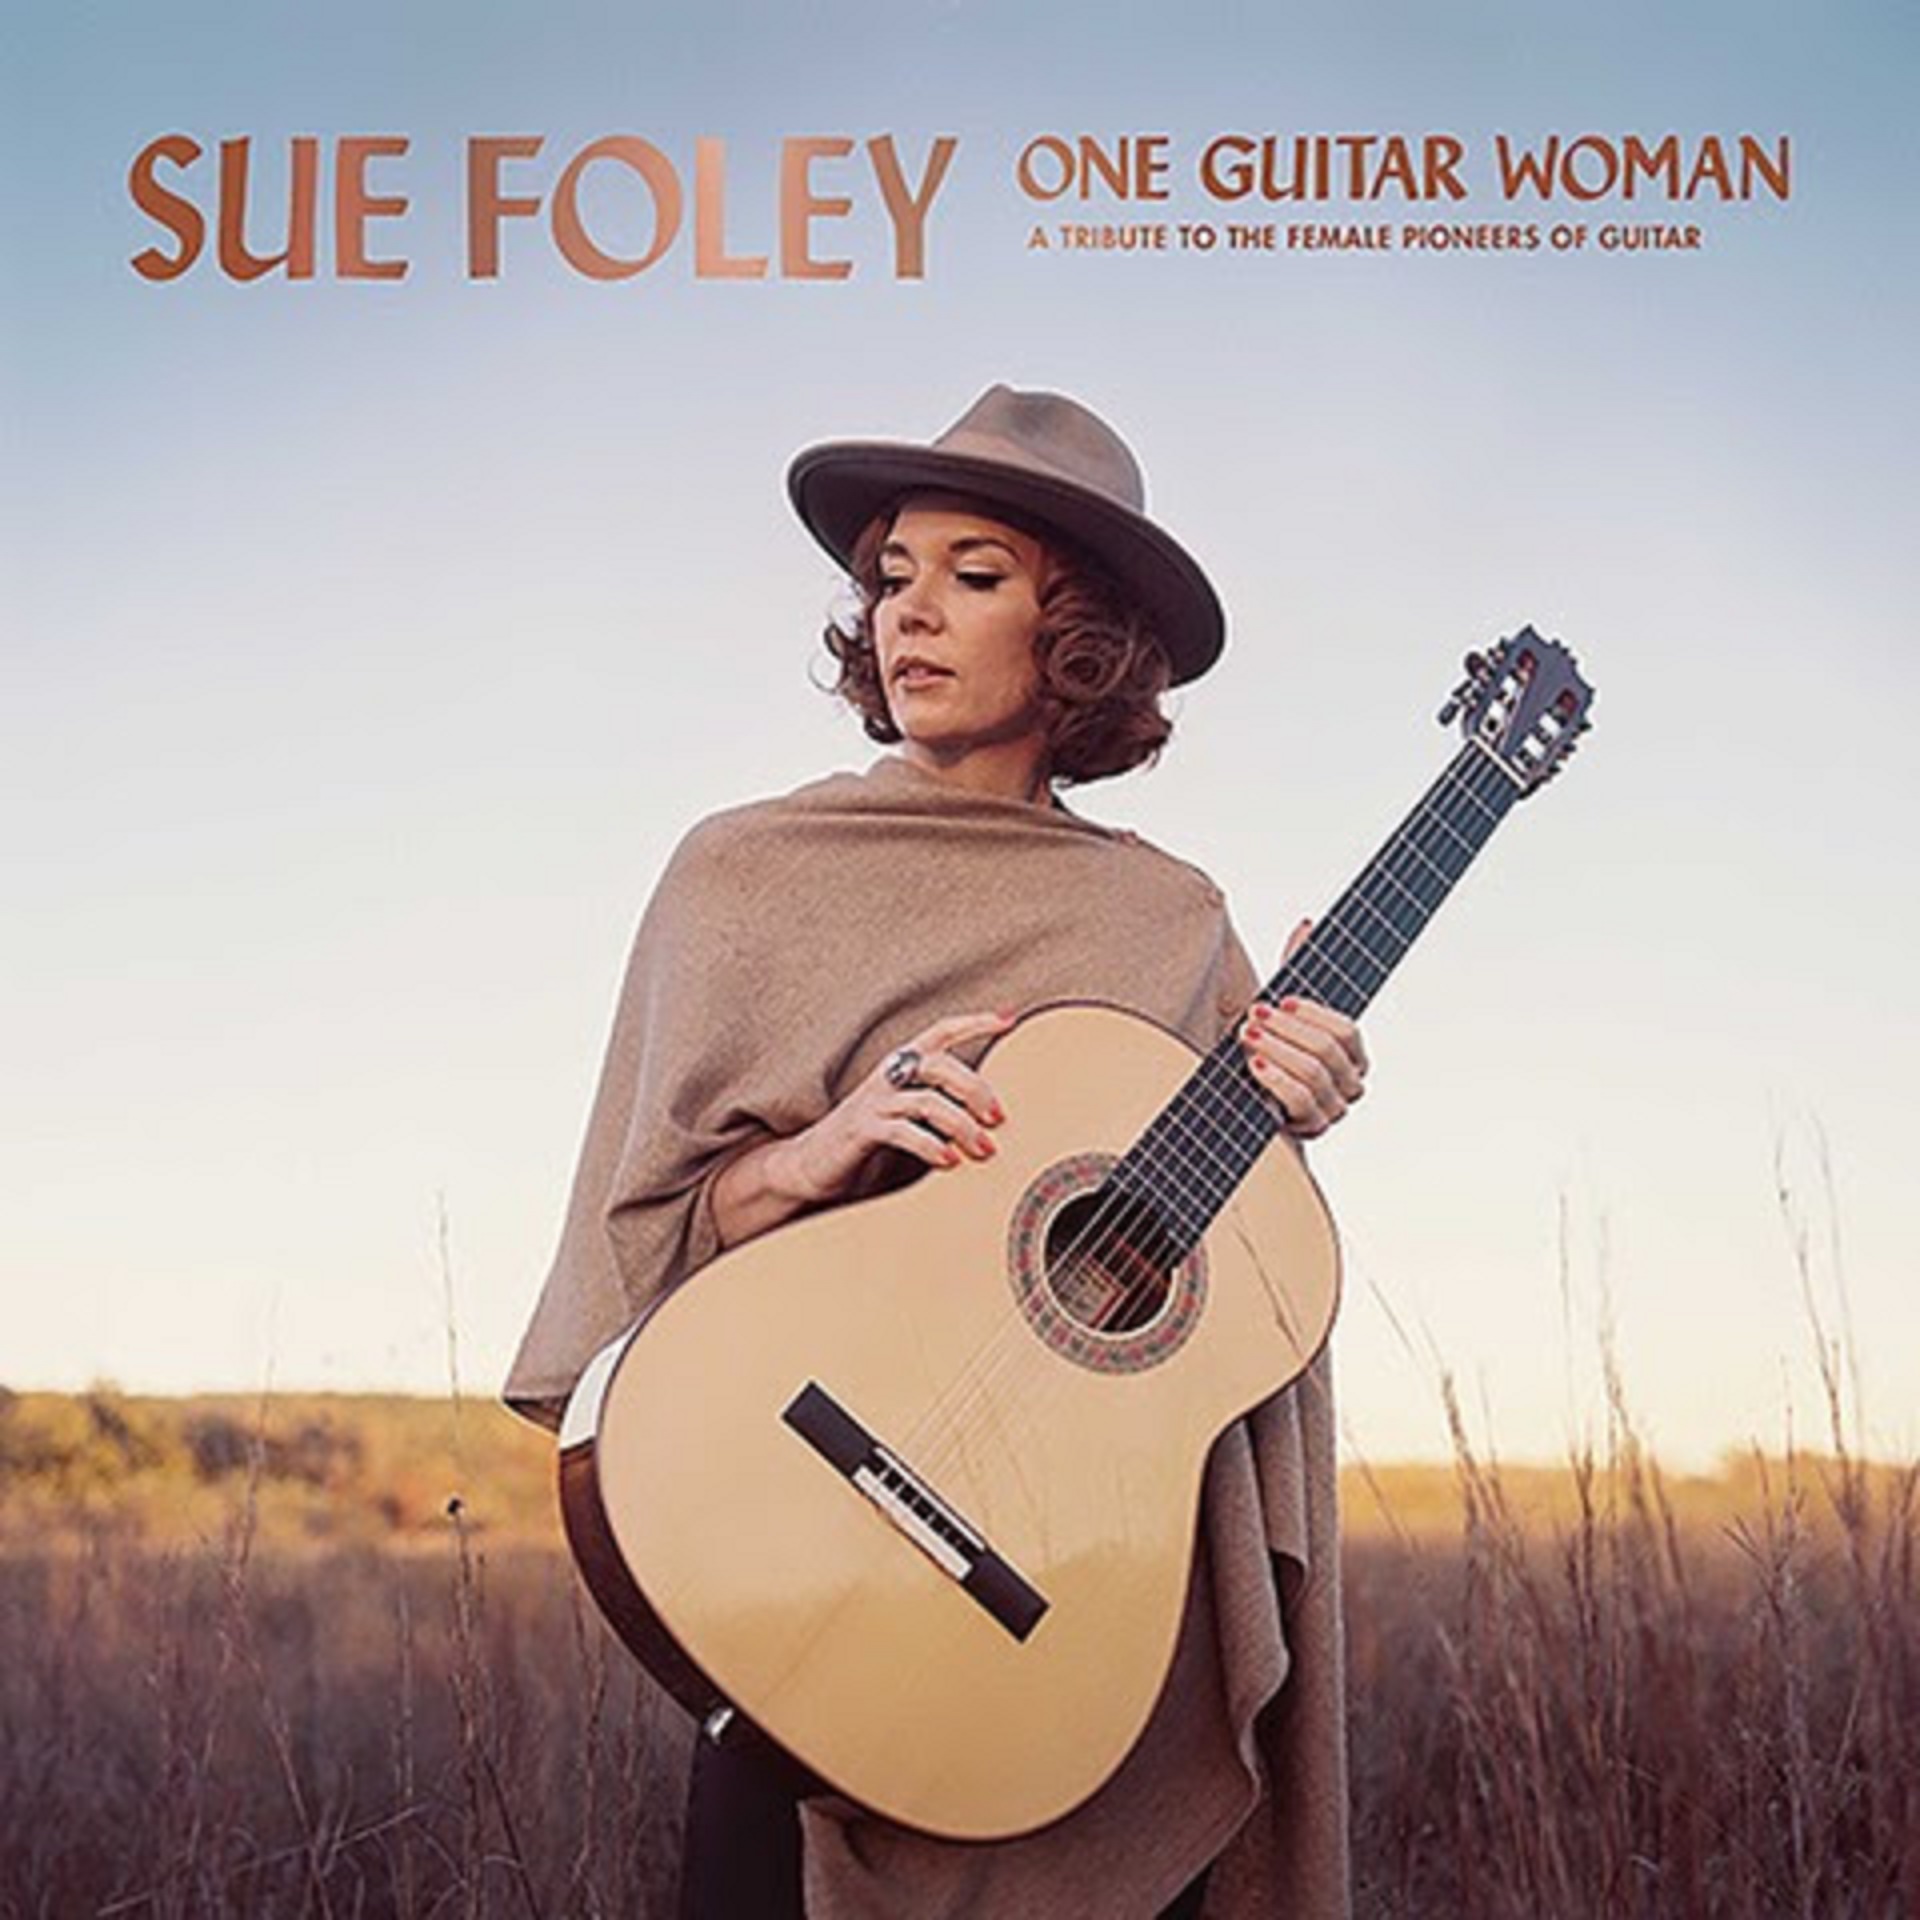 SUE FOLEY’S ONE GUITAR WOMAN AVAILABLE NOW ON STONY PLAIN RECORDS